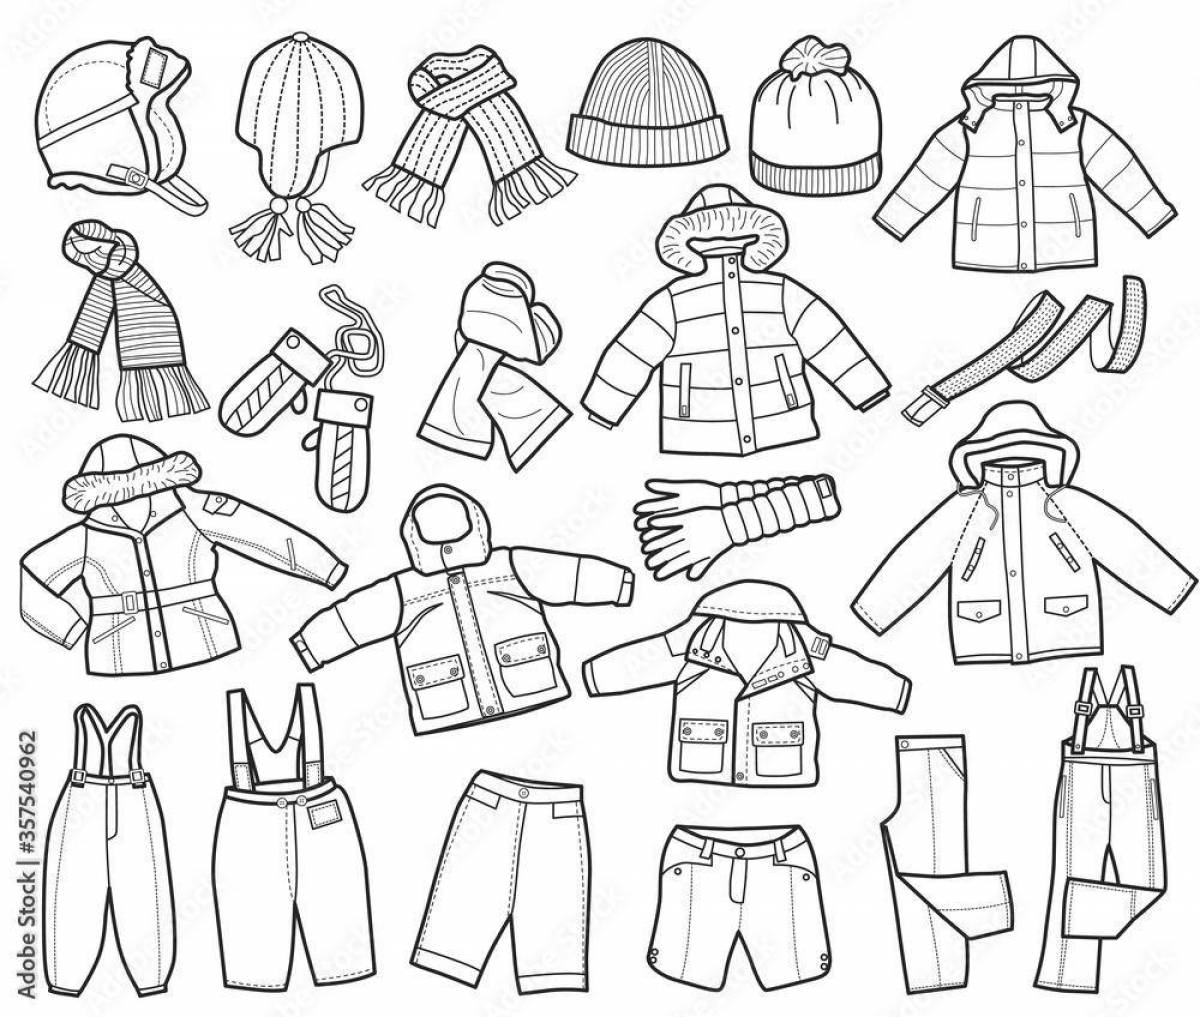 Joyful winter clothes coloring book for kids